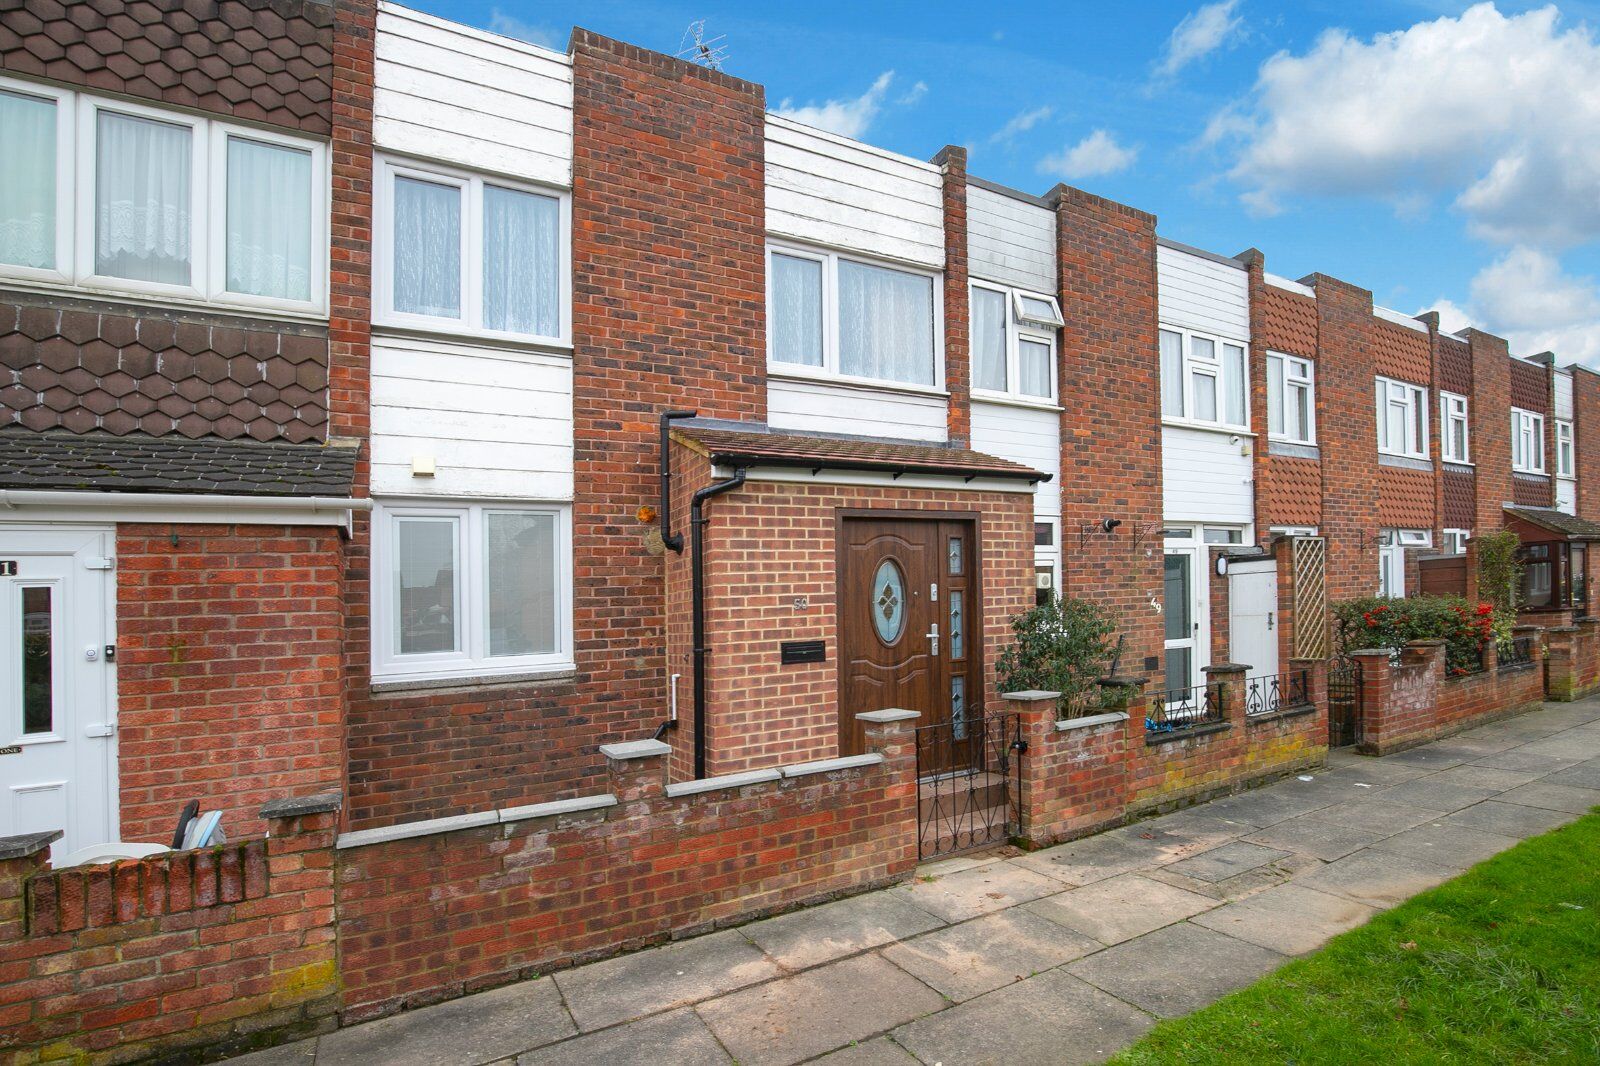 2 bedroom mid terraced house for sale Woodman Path, Ilford, IG6, main image